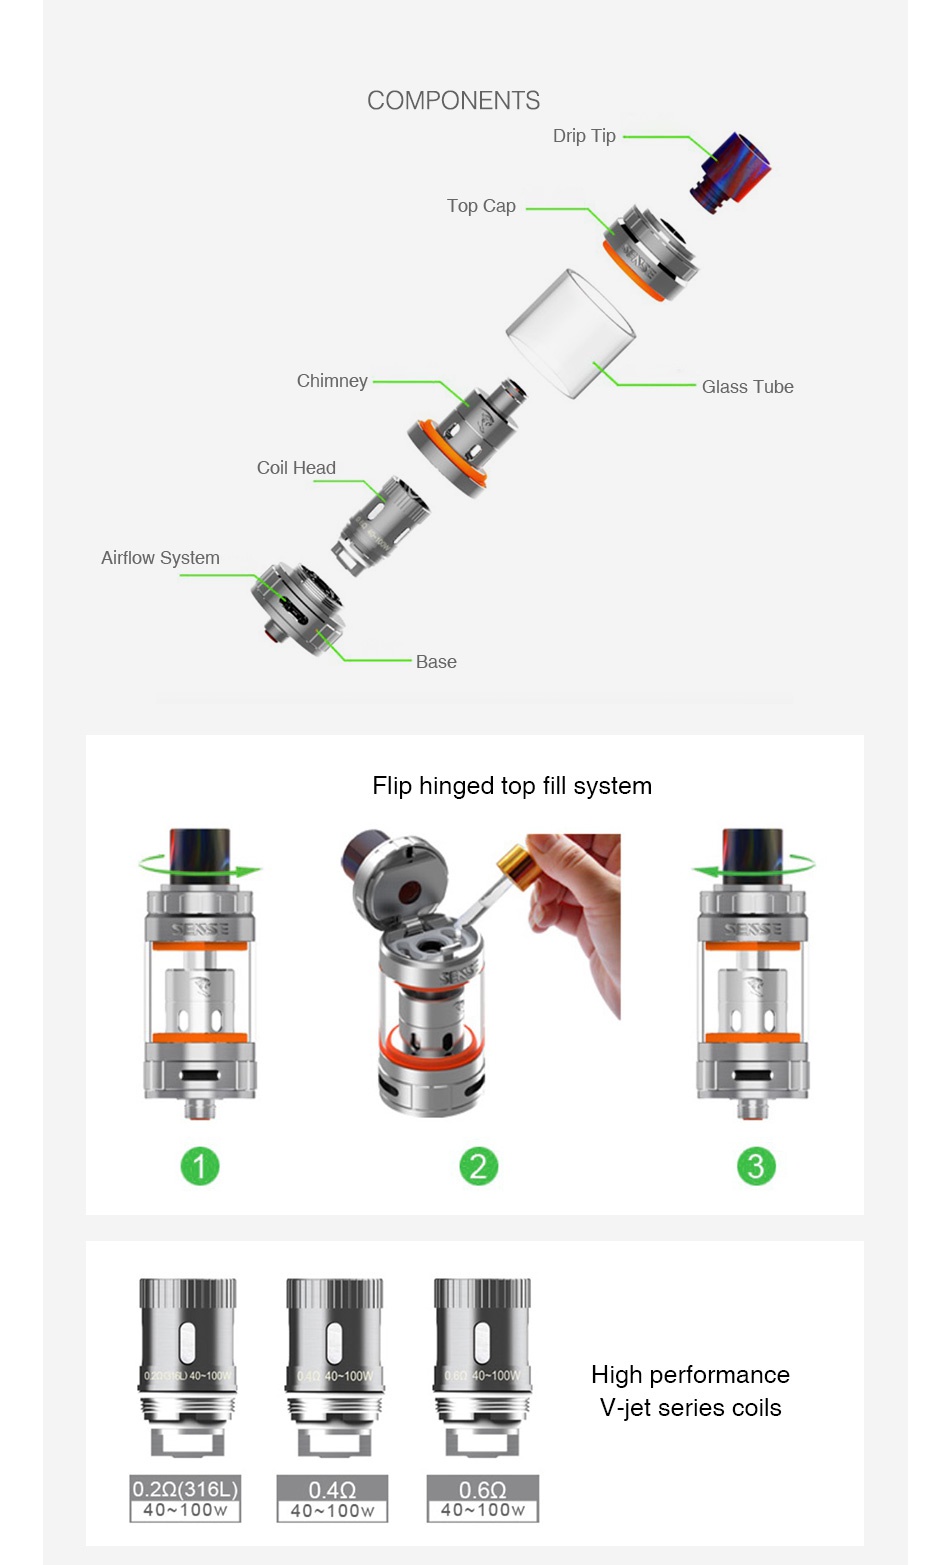 Sense Herakles 3 Subohm Tank 4.5ml COMPONENTS Drip Til op Cap Glass Tube Coil Head Airflow System Base Flip hinged top fill system High performance V jet series coils 020 316L 049 0 6Q 40 100W 40 100W LAo  100w